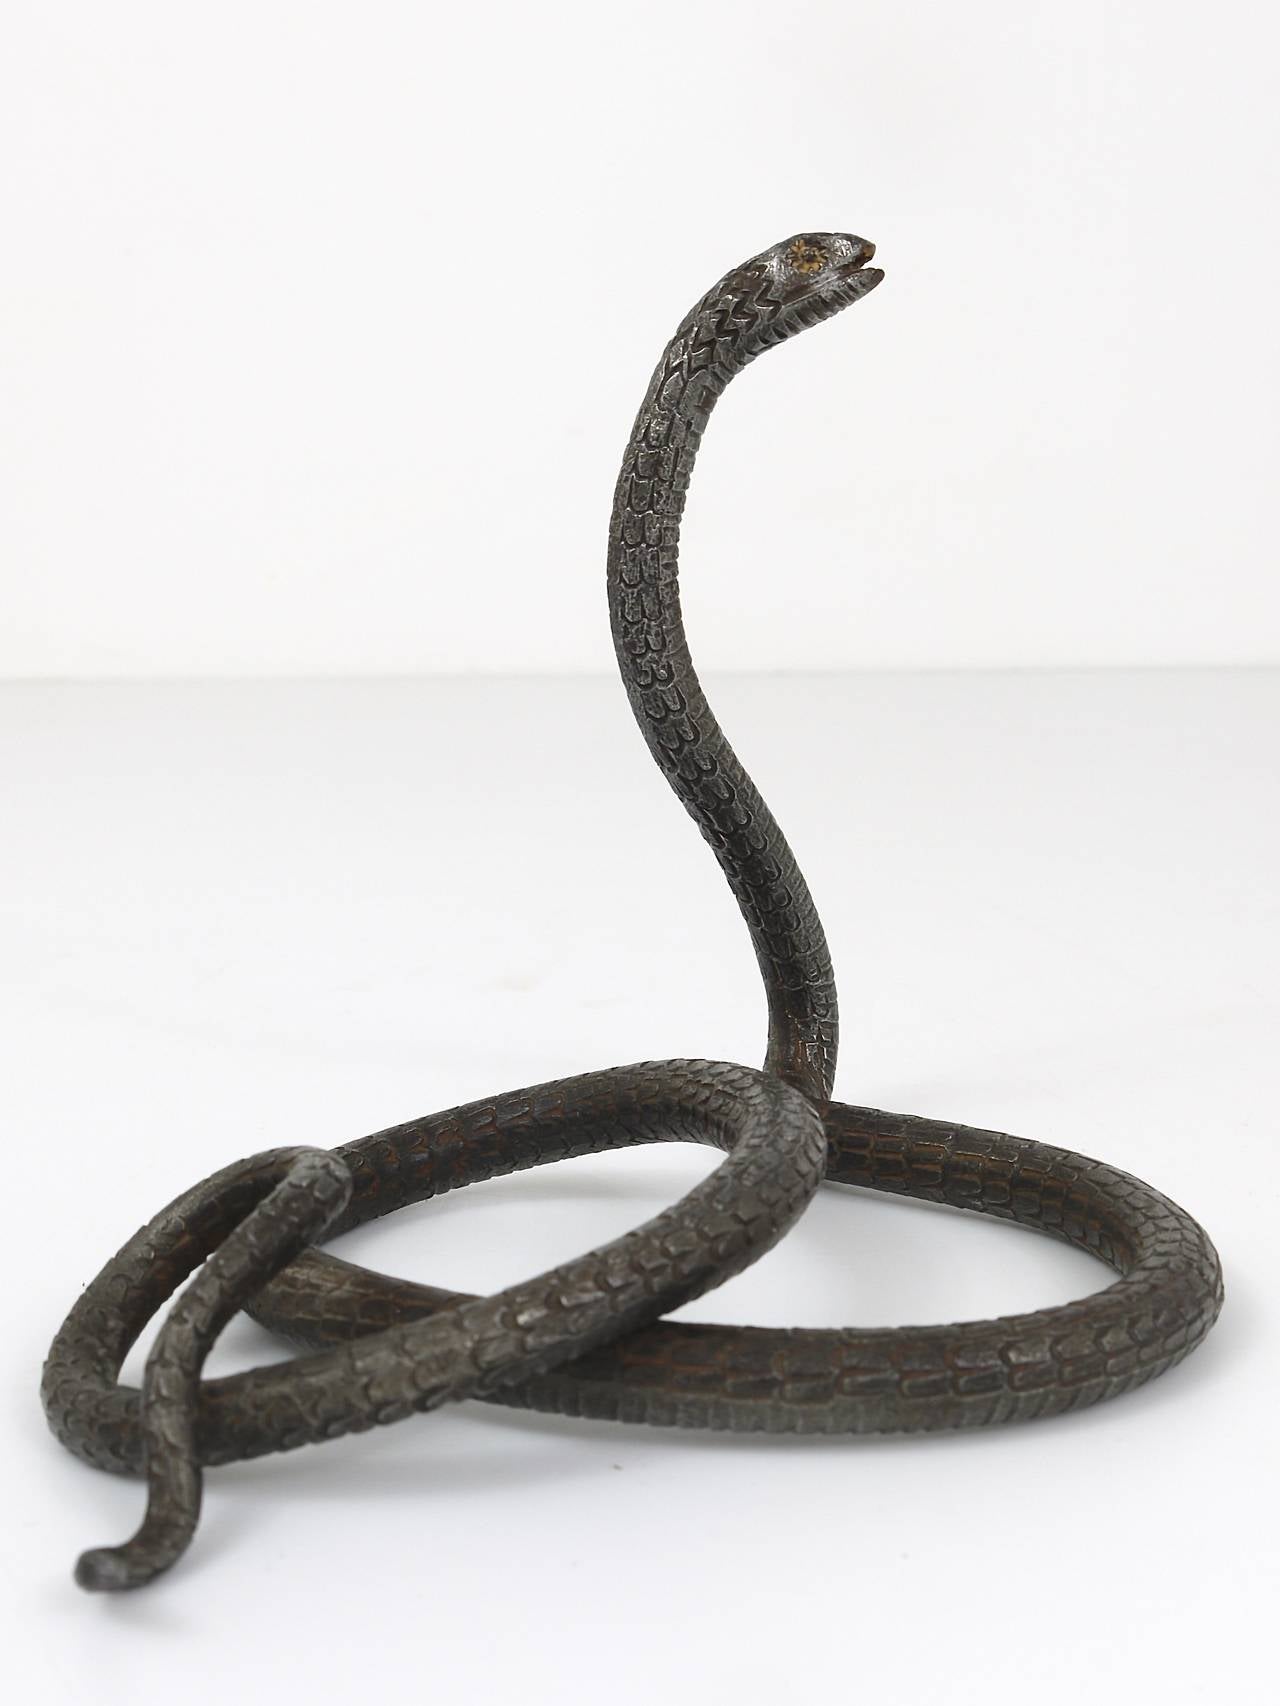 A handmade sculpture of of a snake, handmade of forged iron by a Viennese metalworker in the 1920s. Height: 5